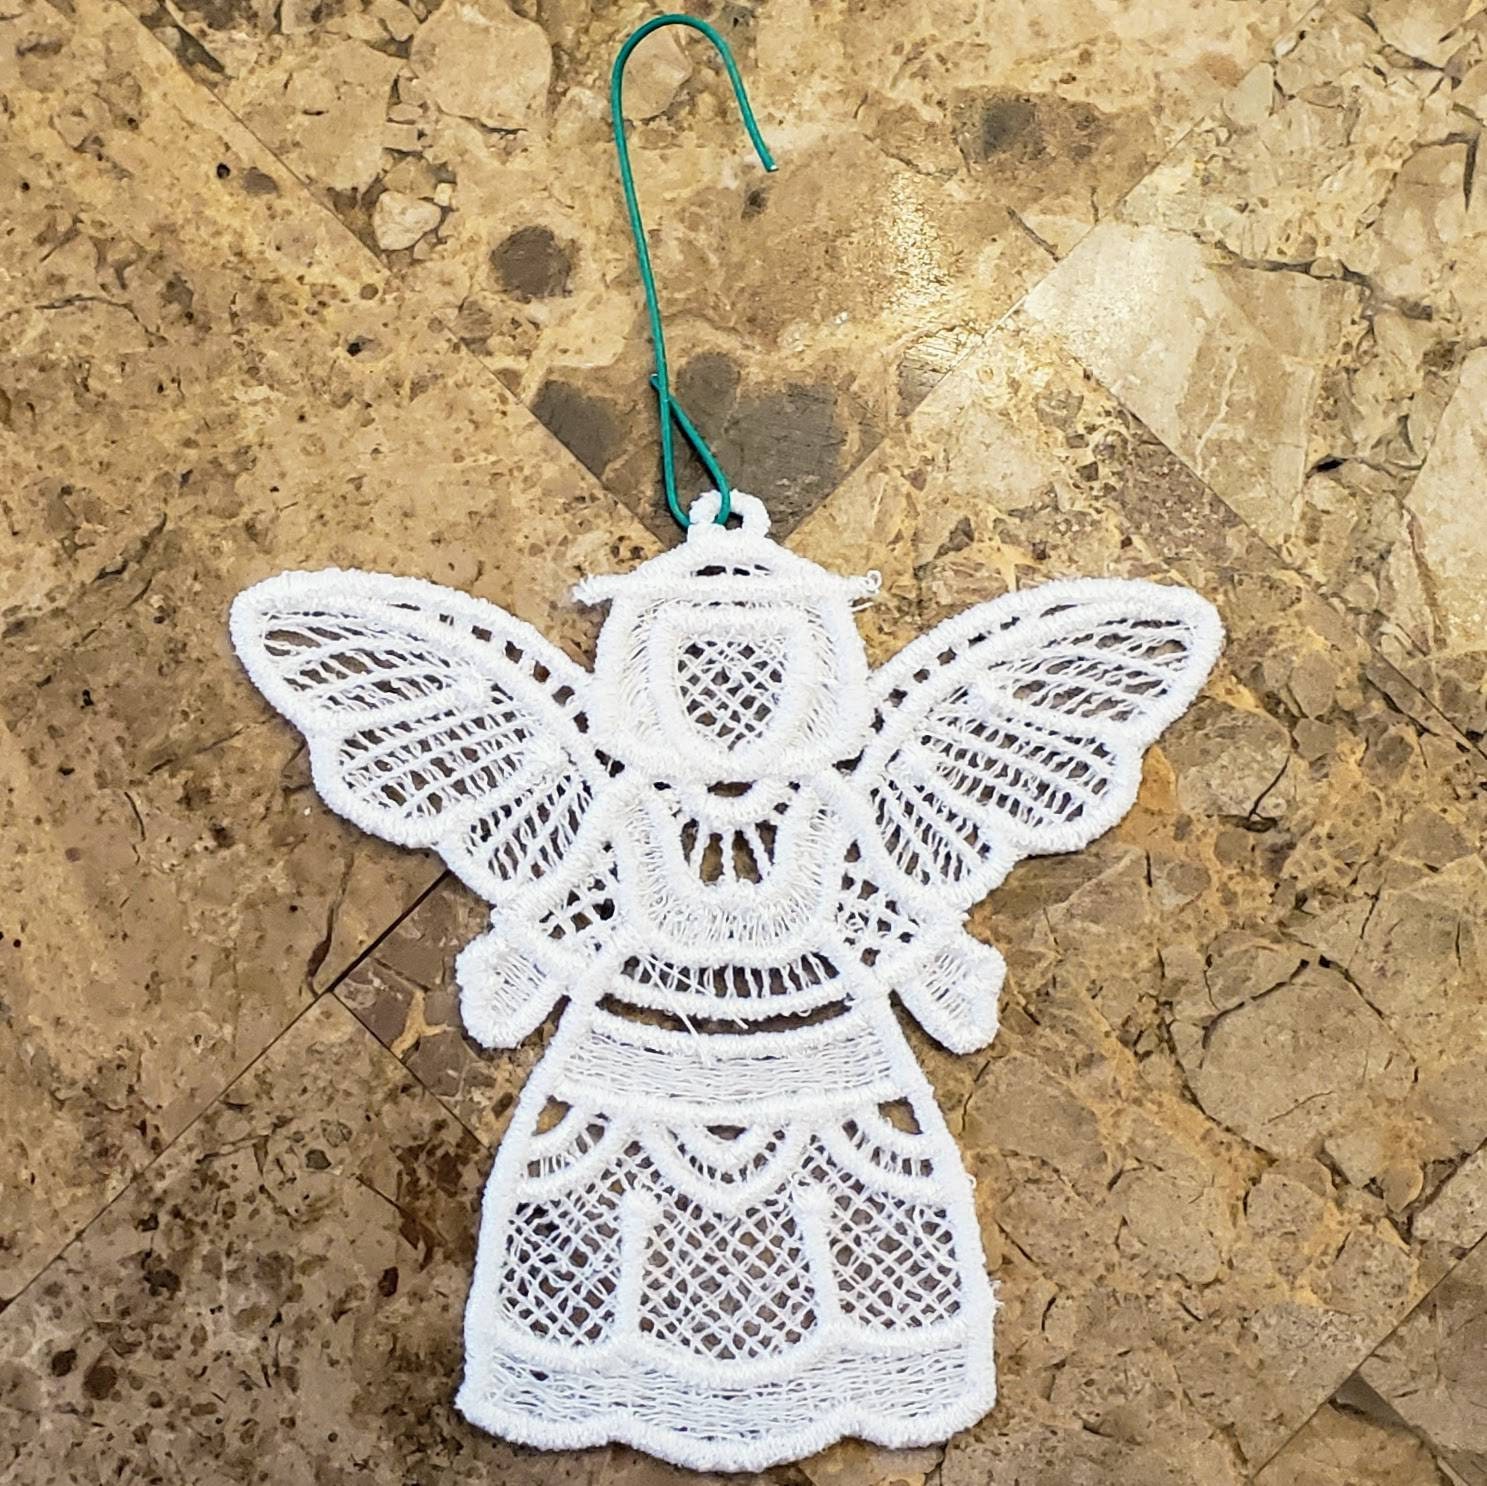 Angel Christmas Ornament Made from Free Standing Lace FSL with Embroidery Thread Lace Handmade Can be Custom Made in Any Color!